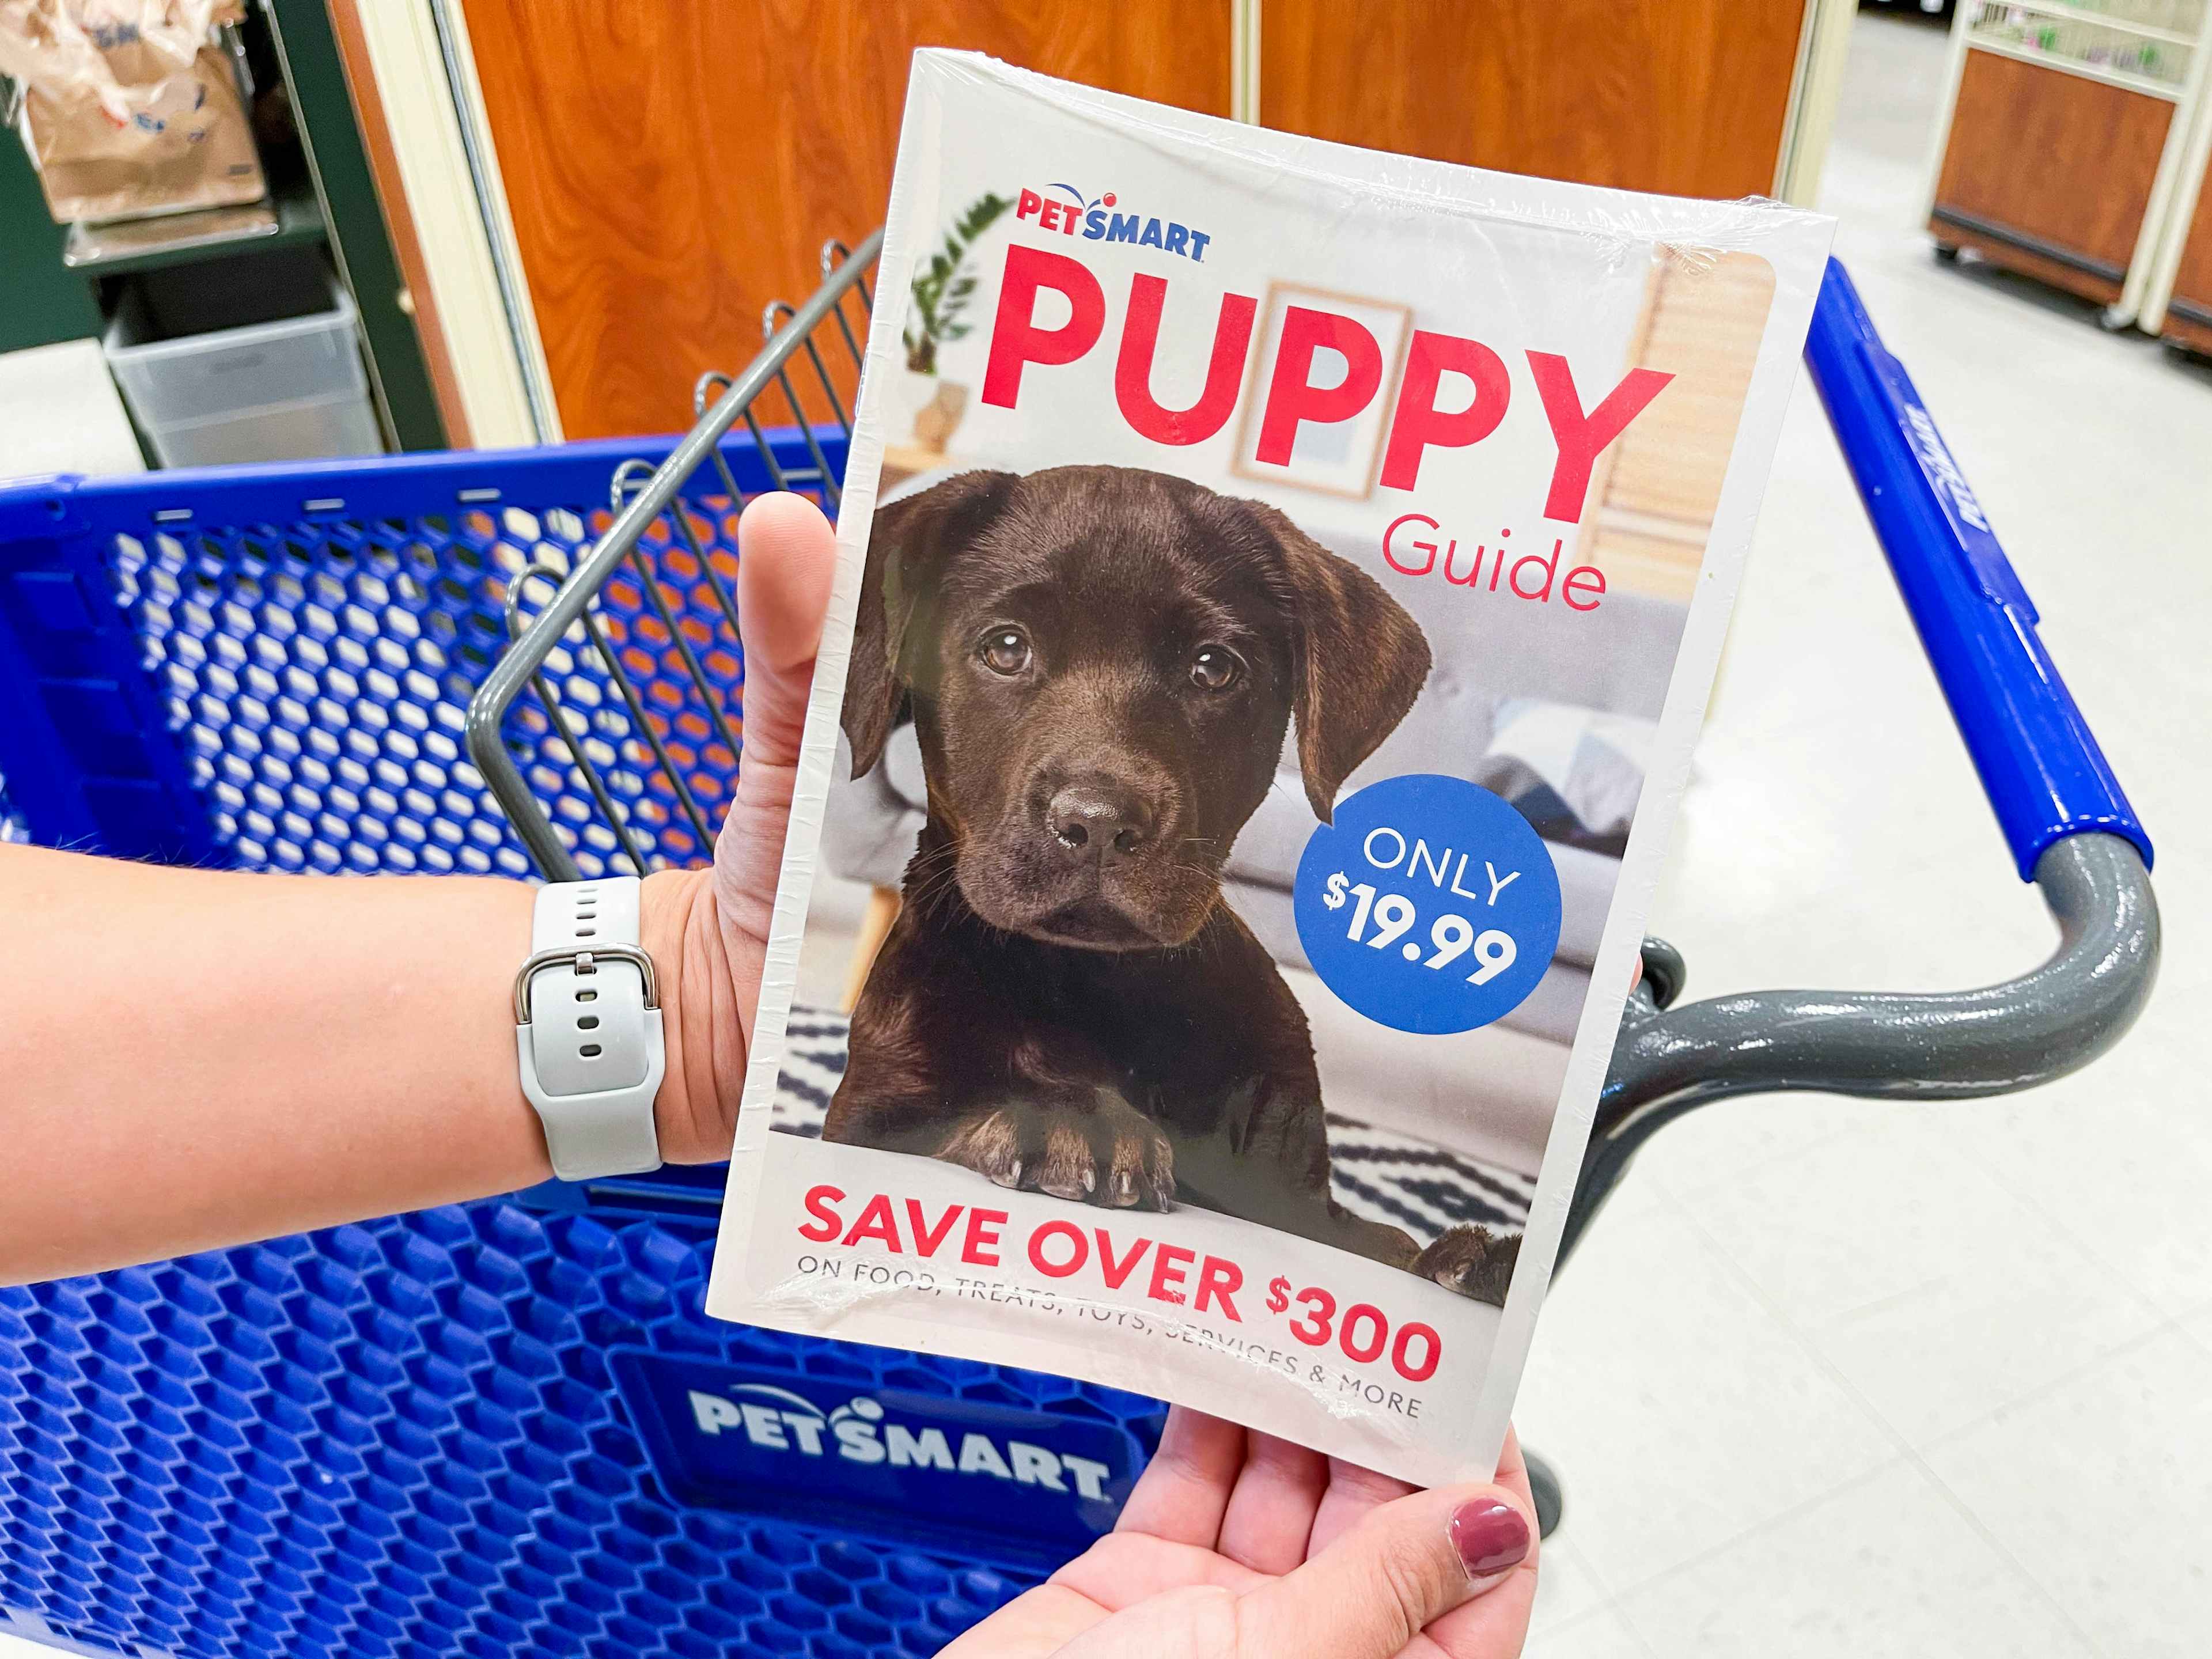 A person's hands holding up a PetSmart Puppy Guide in front of a PetSmart shopping cart.